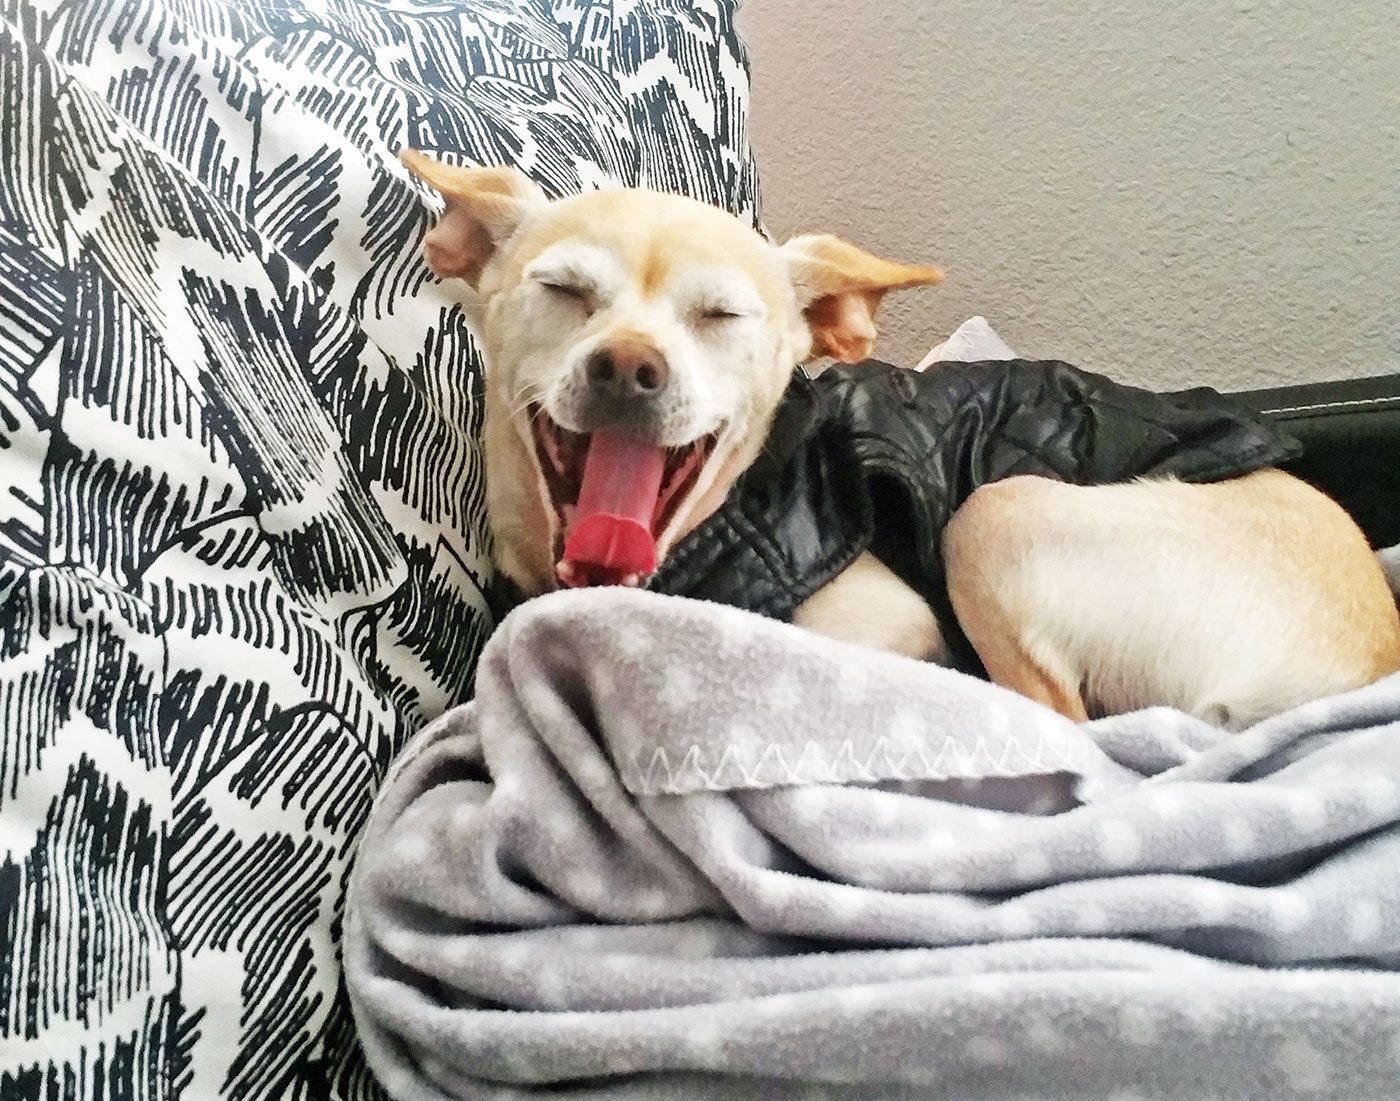 Gunter the chihuahua yawning - he spends the majority of each day sleeping.